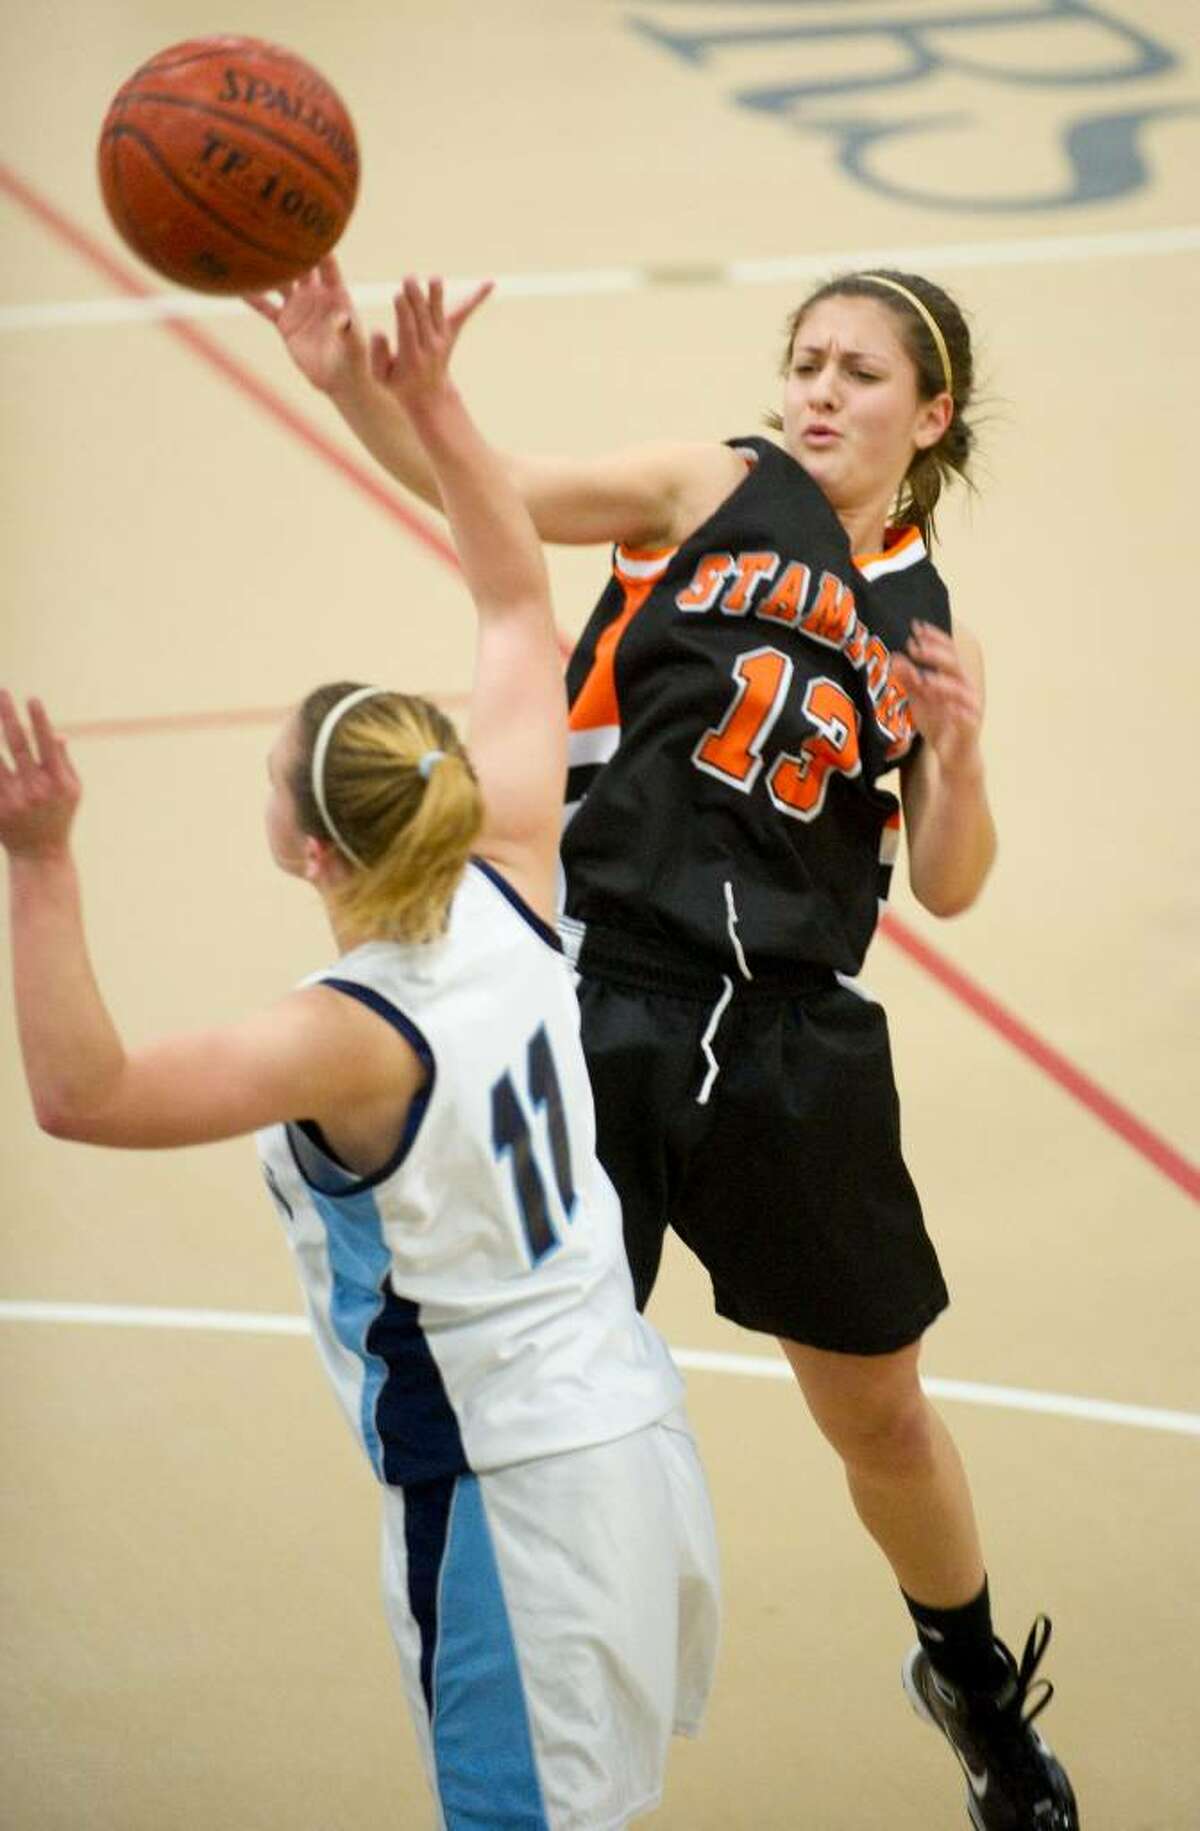 Stamford's Kelsey Cognetta, right, passes around Wilton's Stacey Peroka, left, during an FCIAC girls basketball game at Wilton High School in Wilton, Conn. on Thursday, Jan. 21, 2010.